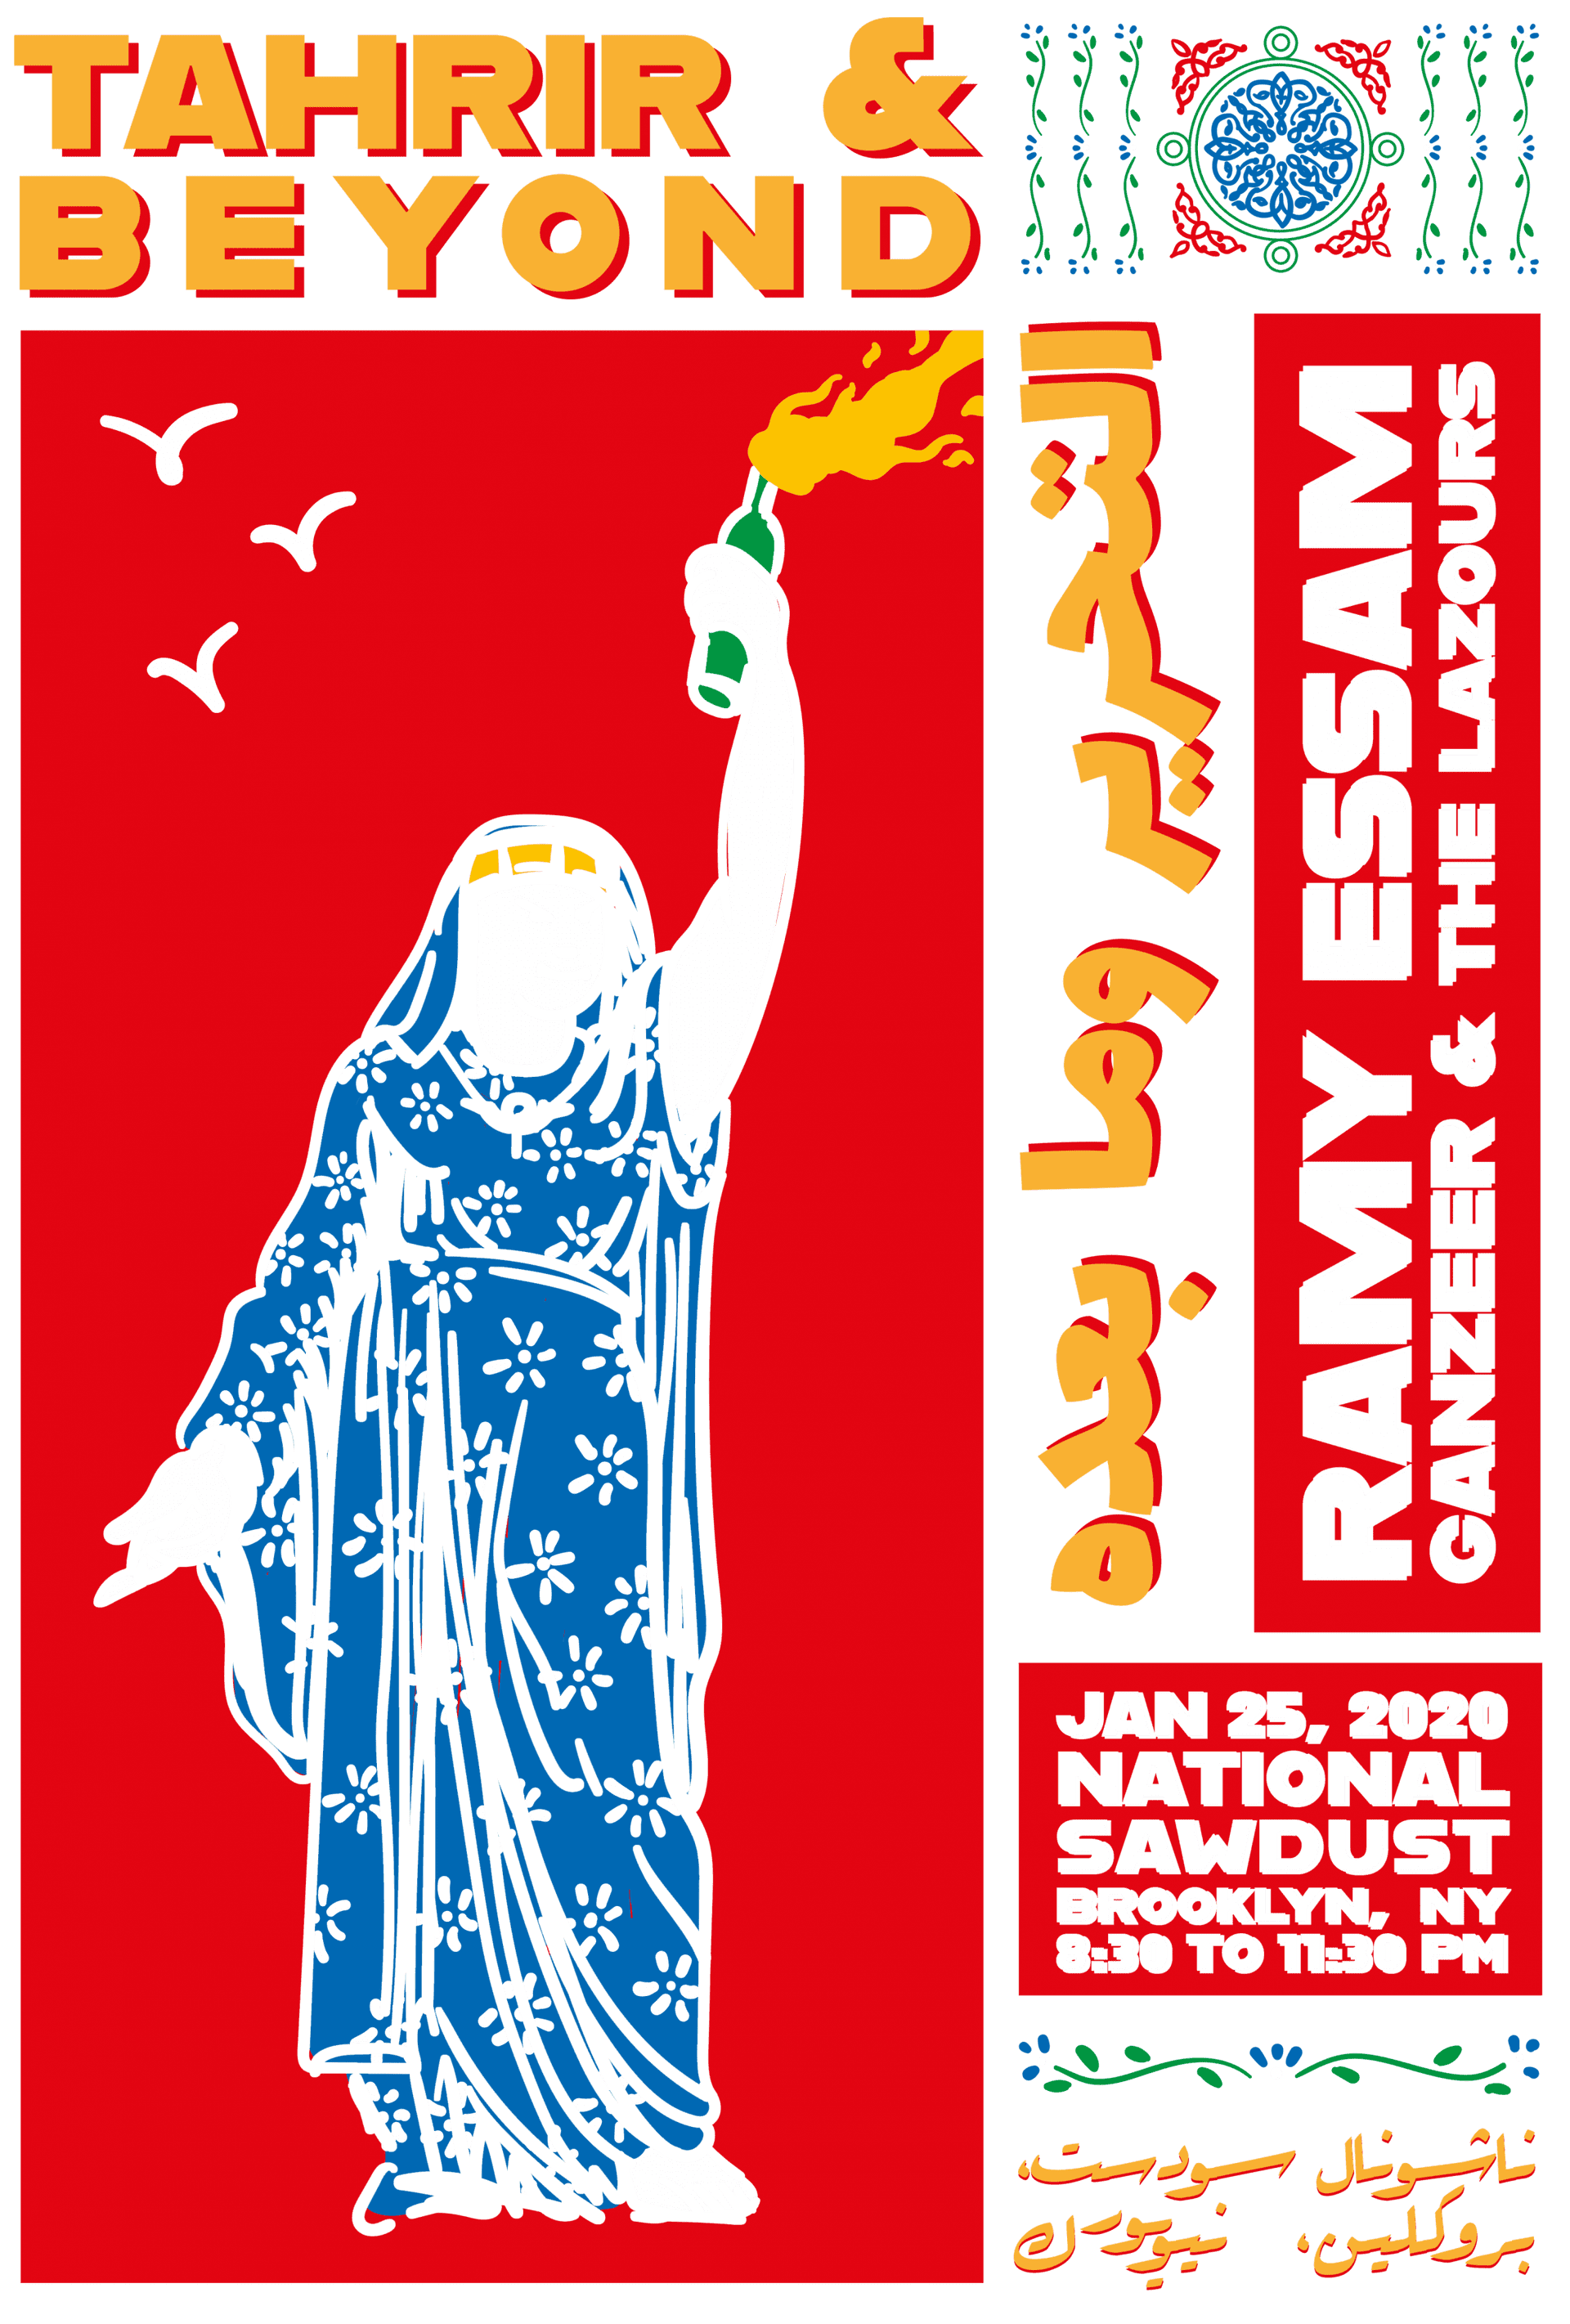 Essam and Ganzeer are teaming up to commemorate the Egyptian Revolution tomorrow, Jan. 25, in New York.